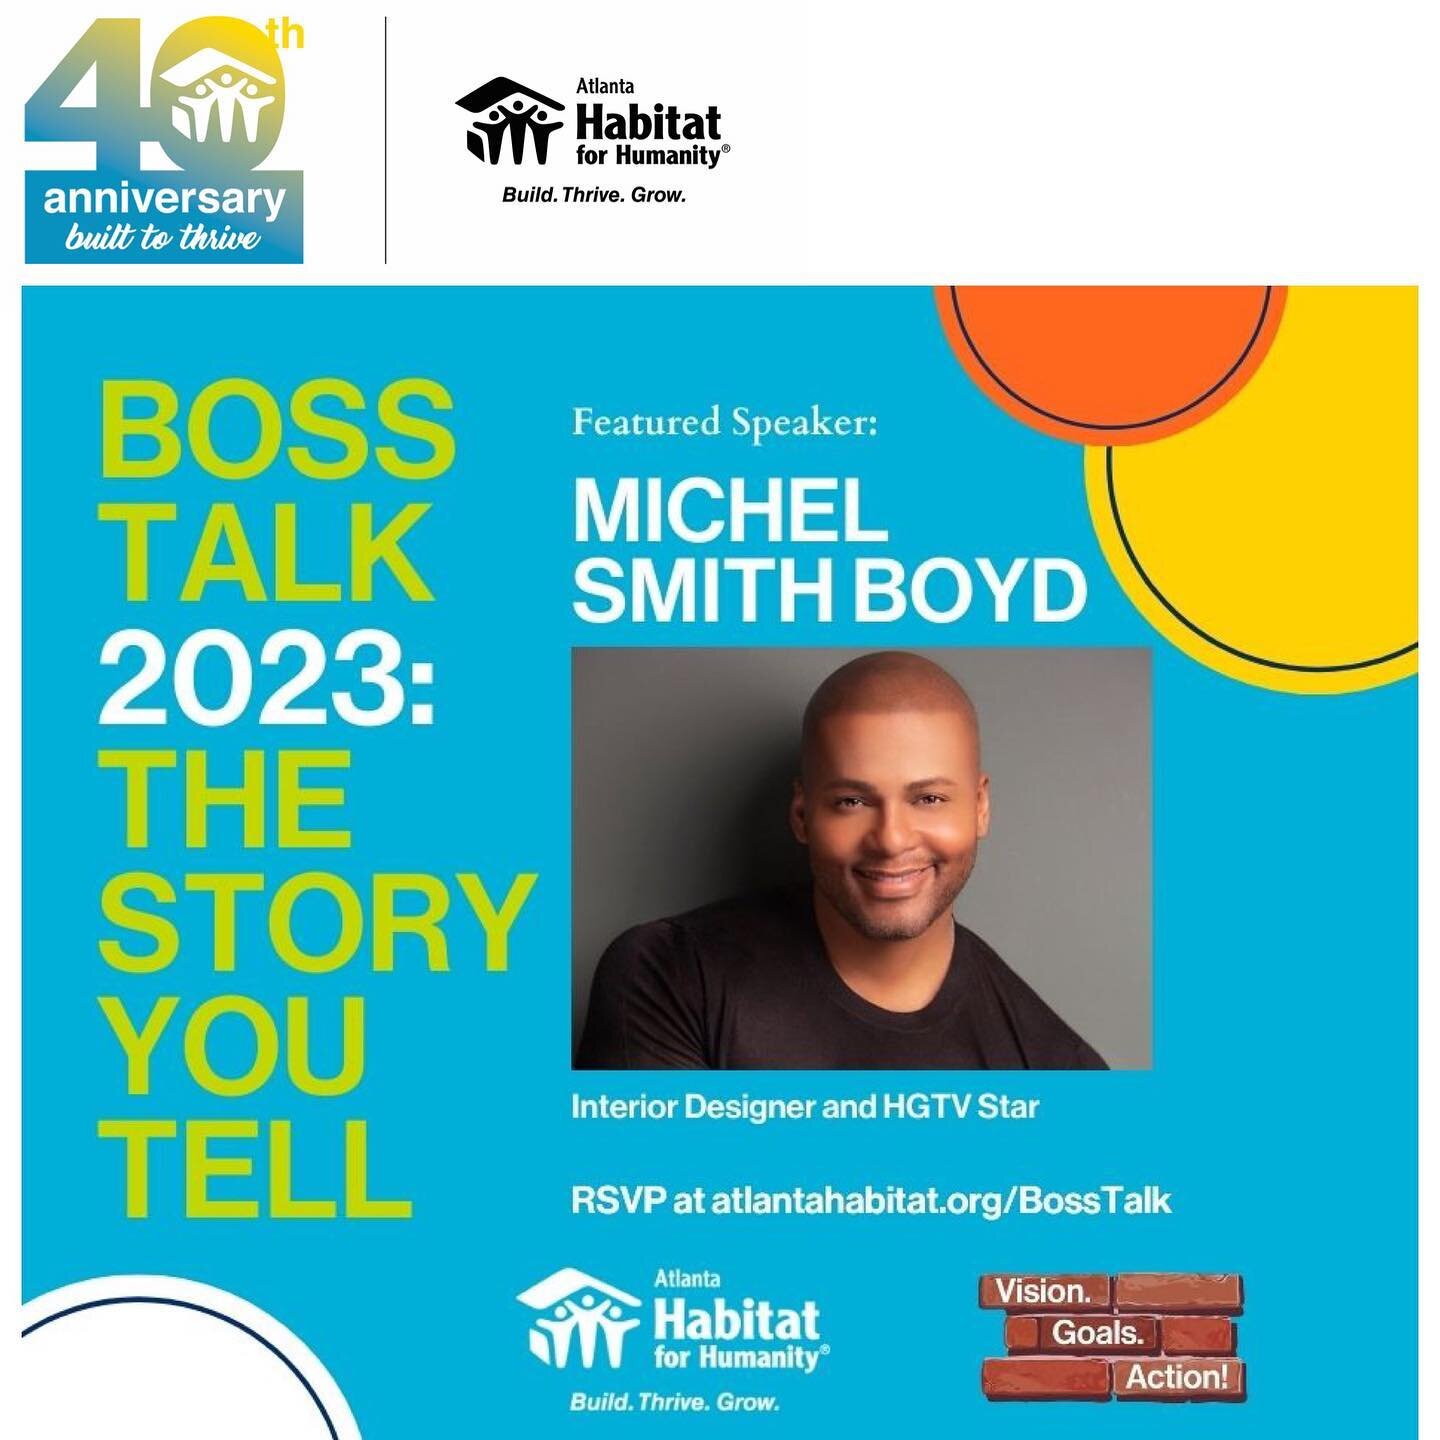 Storytelling is an important element of entrepreneurship and @atlantahabitat is giving me an opportunity to continue my efforts to make luxury more inclusive. Tonight we&rsquo;ll share our pov/experiences with new homeowners &amp; business owners ali